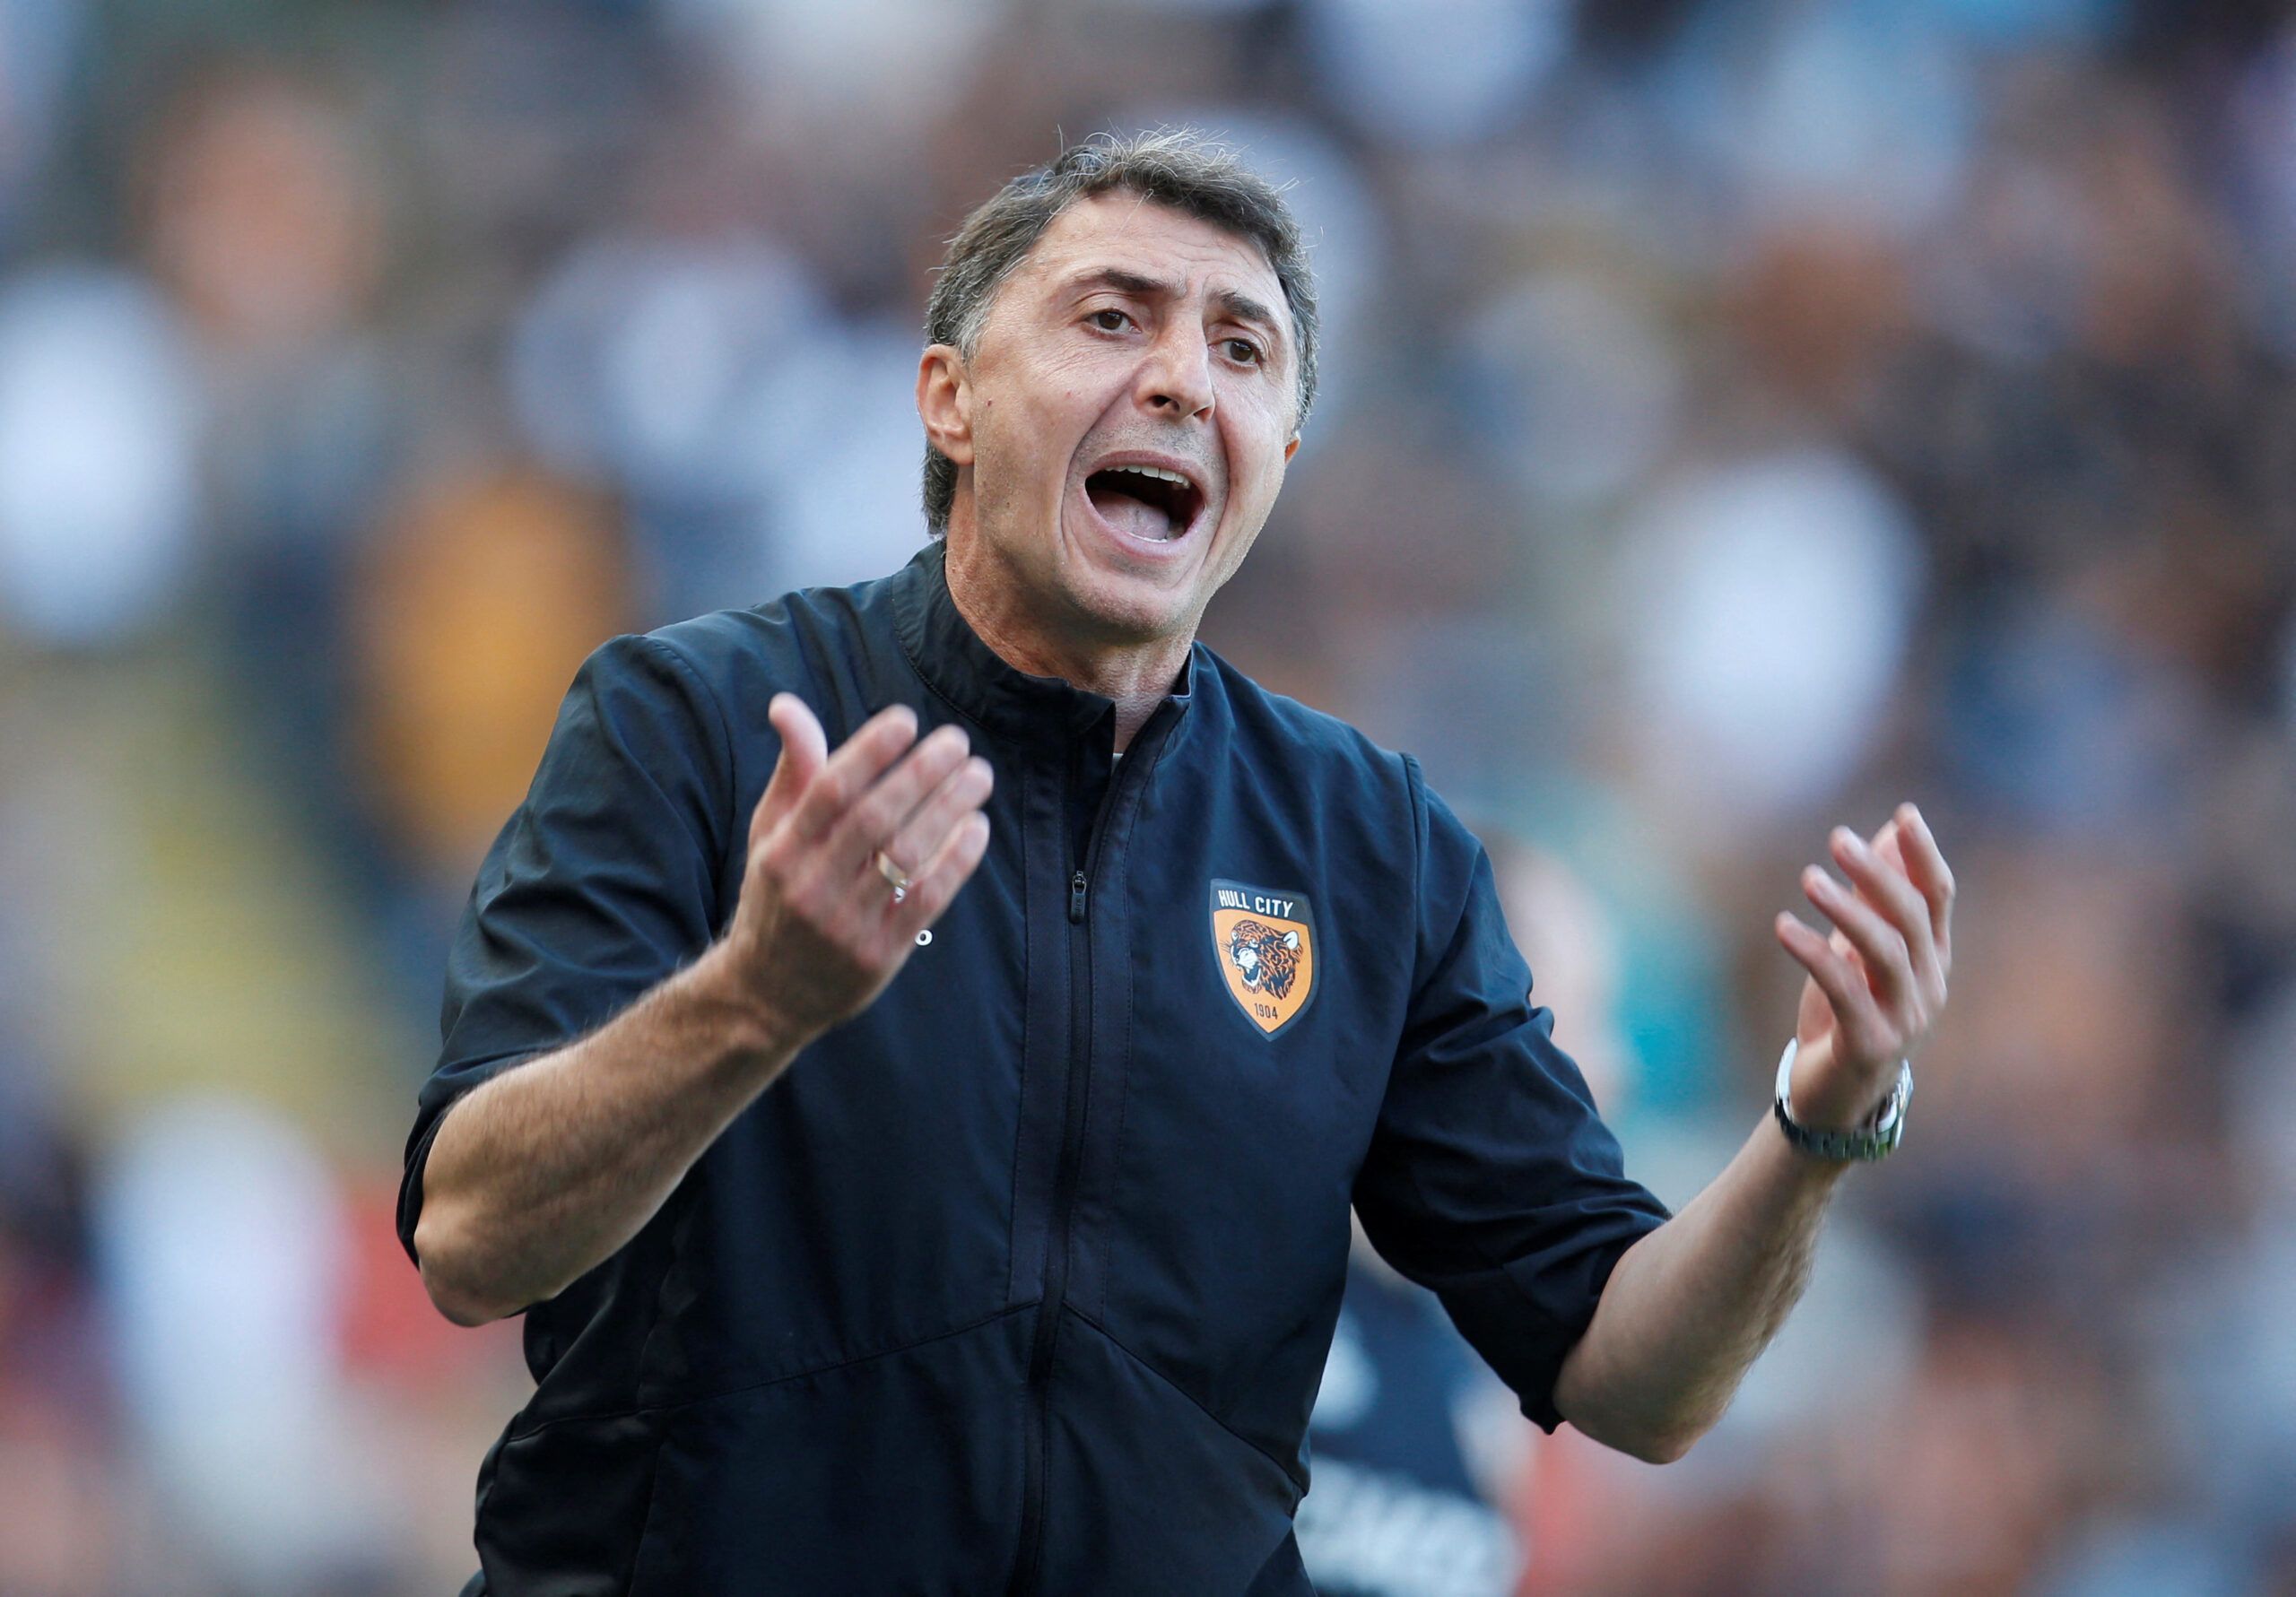 Soccer Football - Championship - Hull City v Coventry City - MKM Stadium, Hull, Britain - August 27, 2022 Hull City manager Shota Arveladze reacts Action Images/Ed Sykes EDITORIAL USE ONLY. No use with unauthorized audio, video, data, fixture lists, club/league logos or 